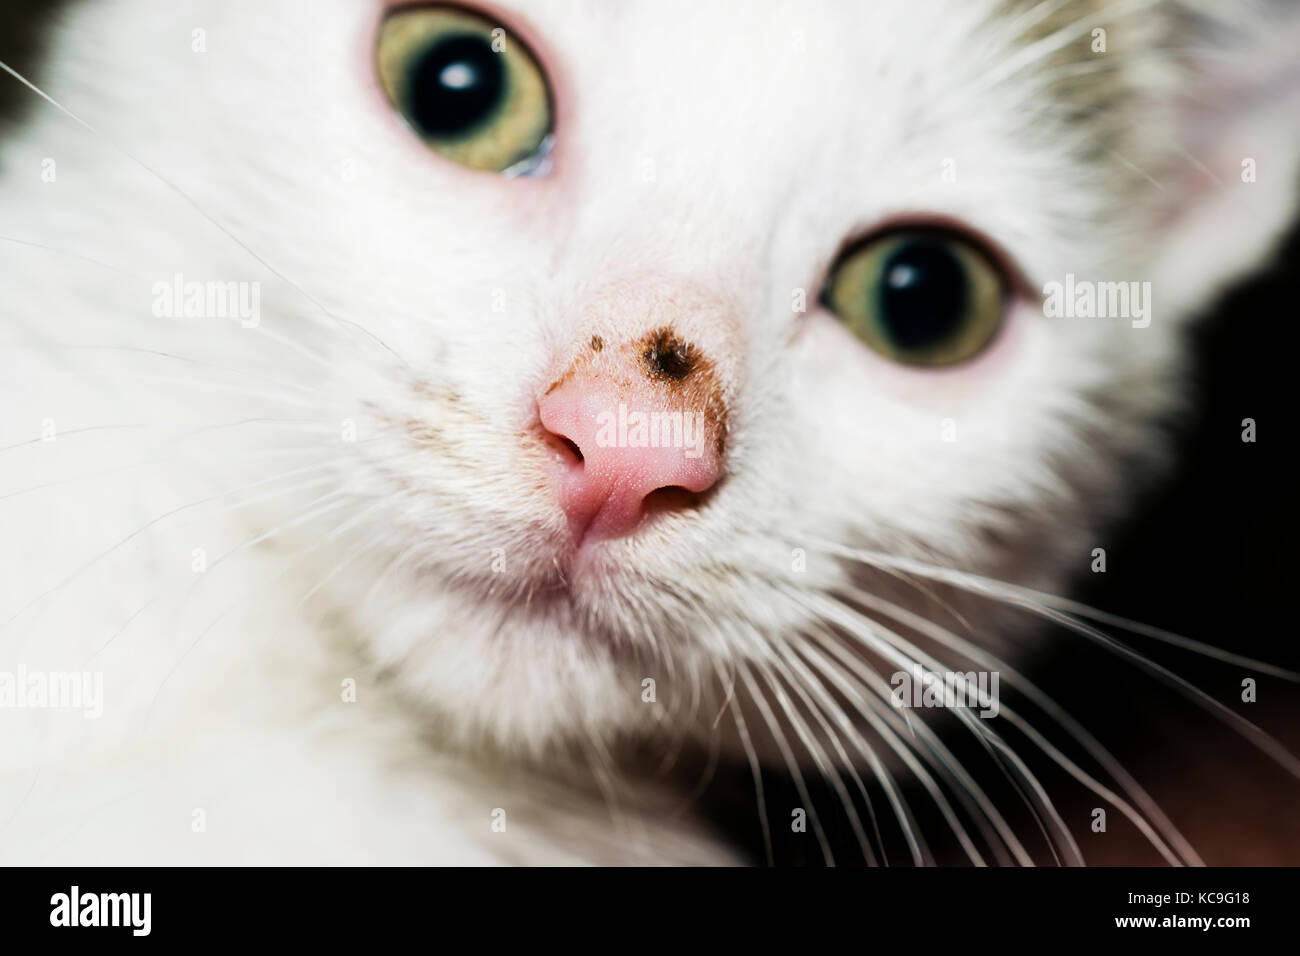 Front View Portrait Of Beautiful Young White Kitten Looking At The Camera Stock Photo